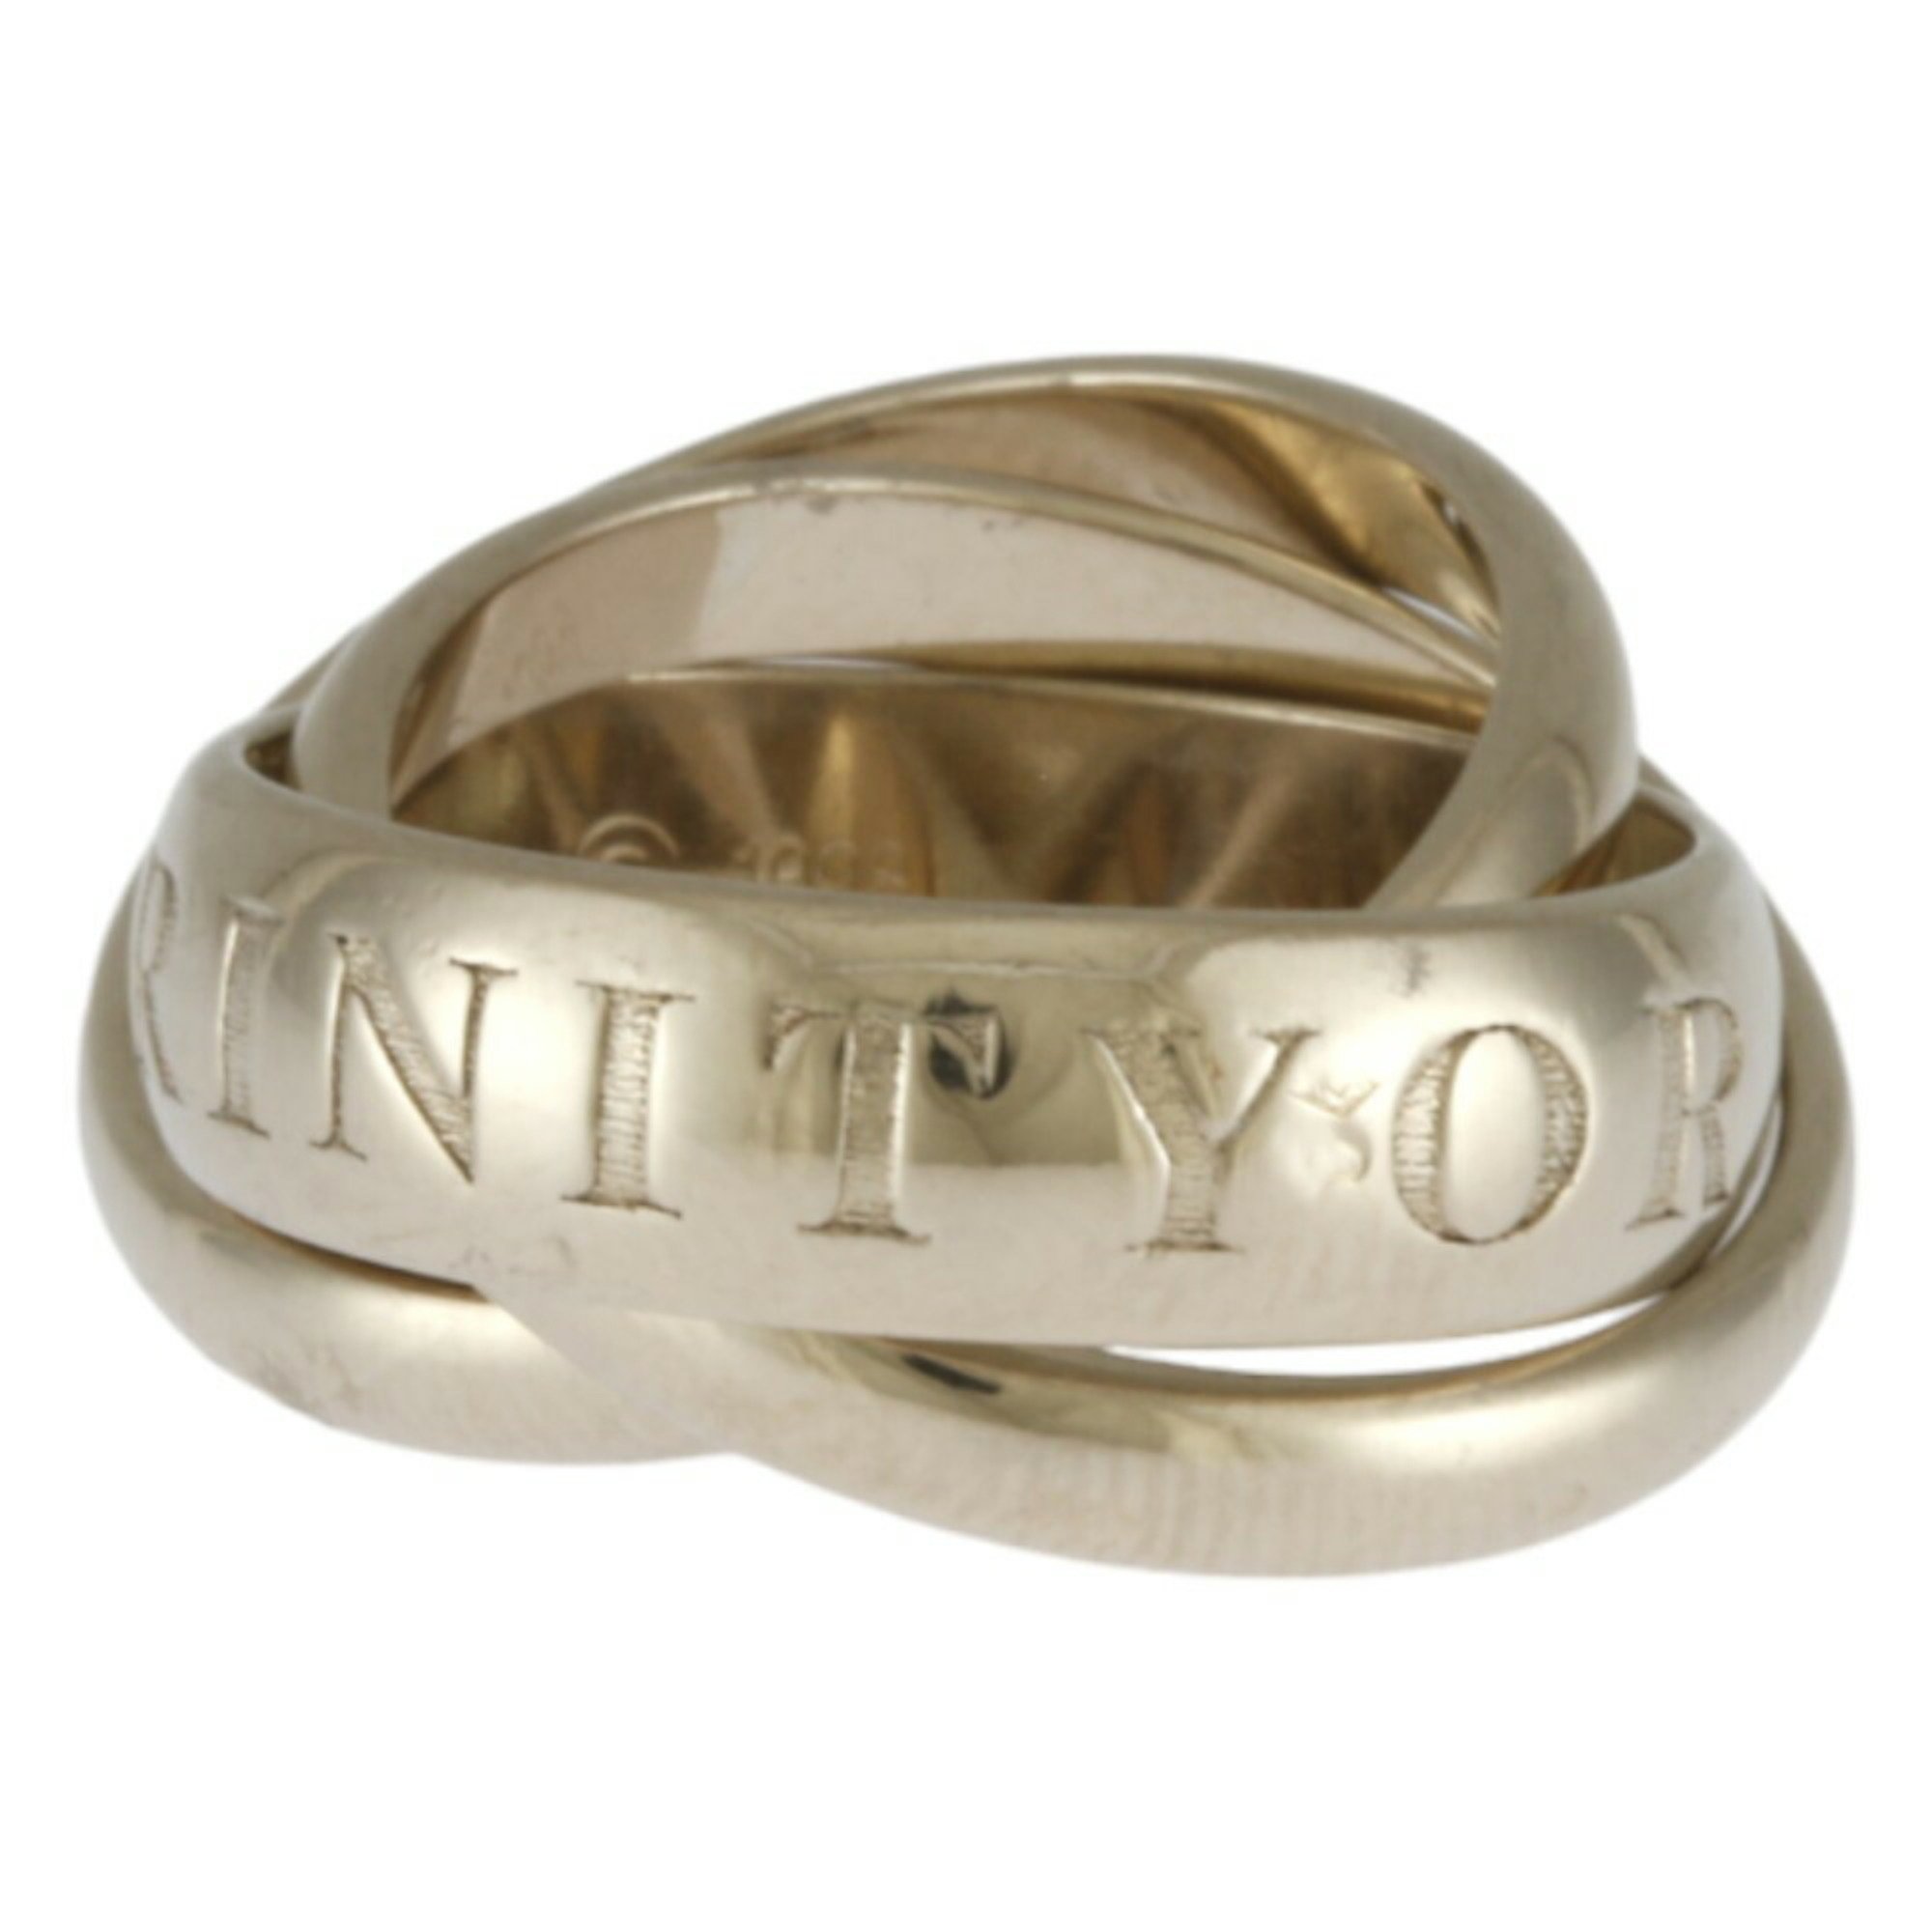 Cartier Trinity 3-Row Ring, Size 8.5, 18K Gold, Women's, CARTIER, Limited Edition